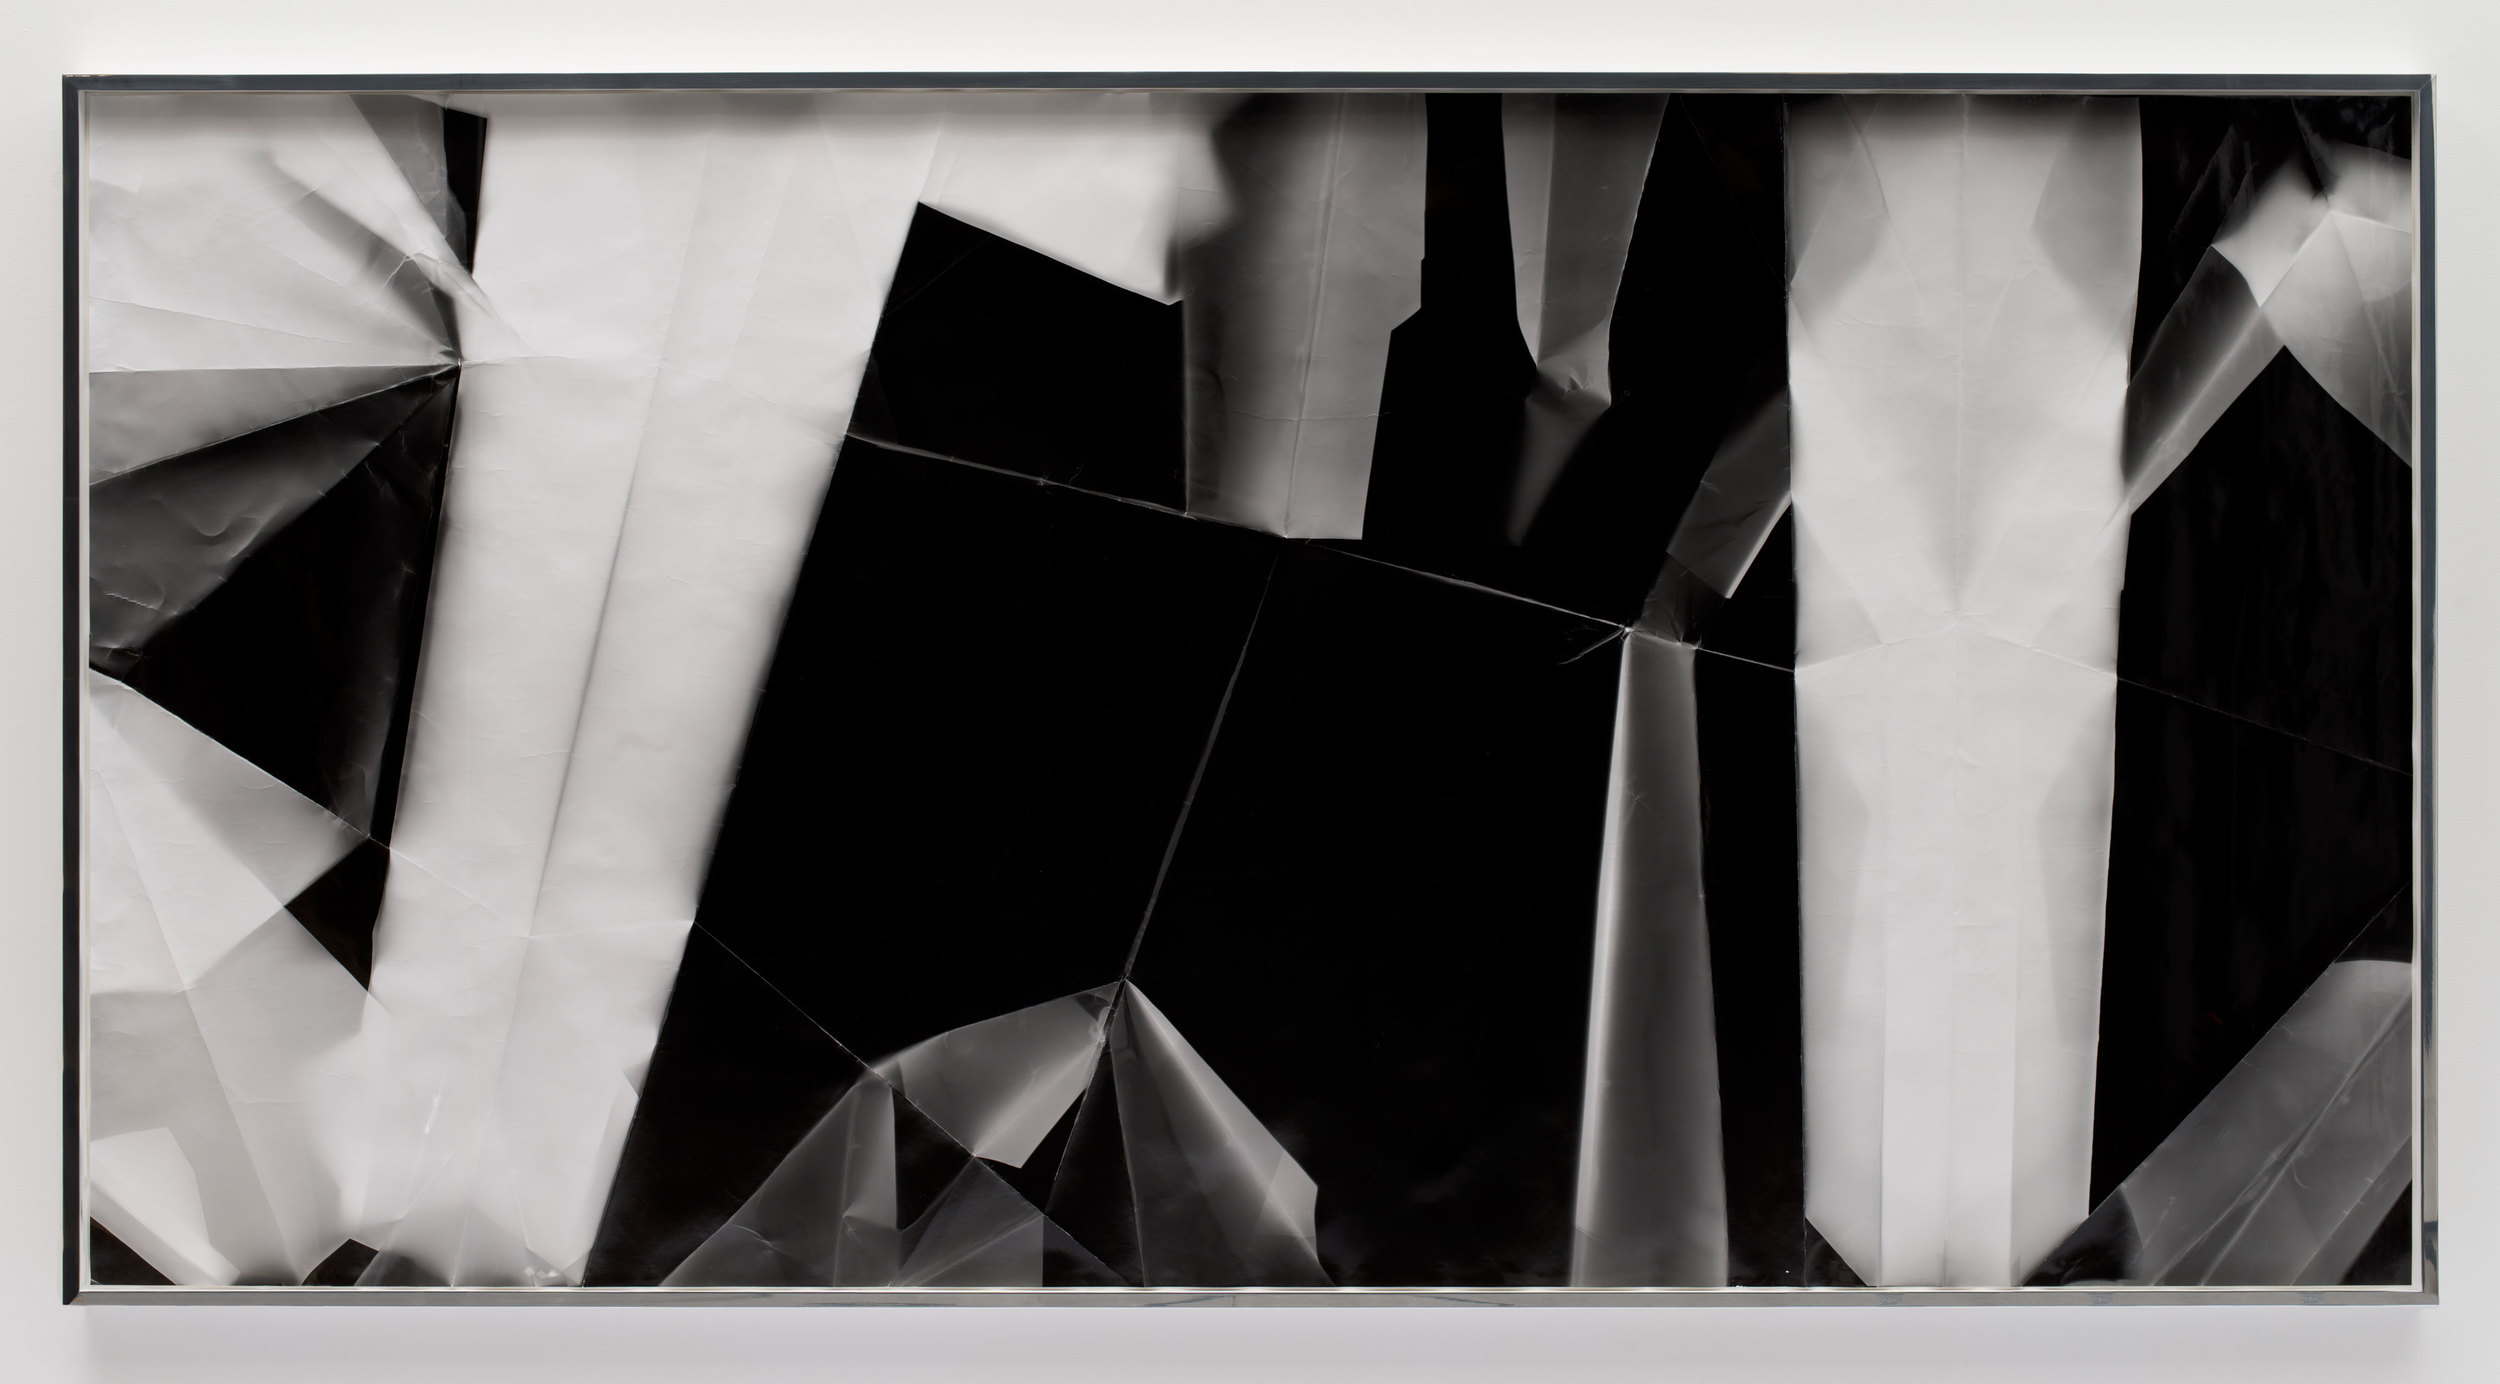   Fold (45º/135º/225º/315º directional light sources), December 31,&nbsp;2012, Los Angeles, California, Ilford Multigrade IV MGF.1K    2012   Black and white fiber based photographic paper  56 x 111 3/4 inches 